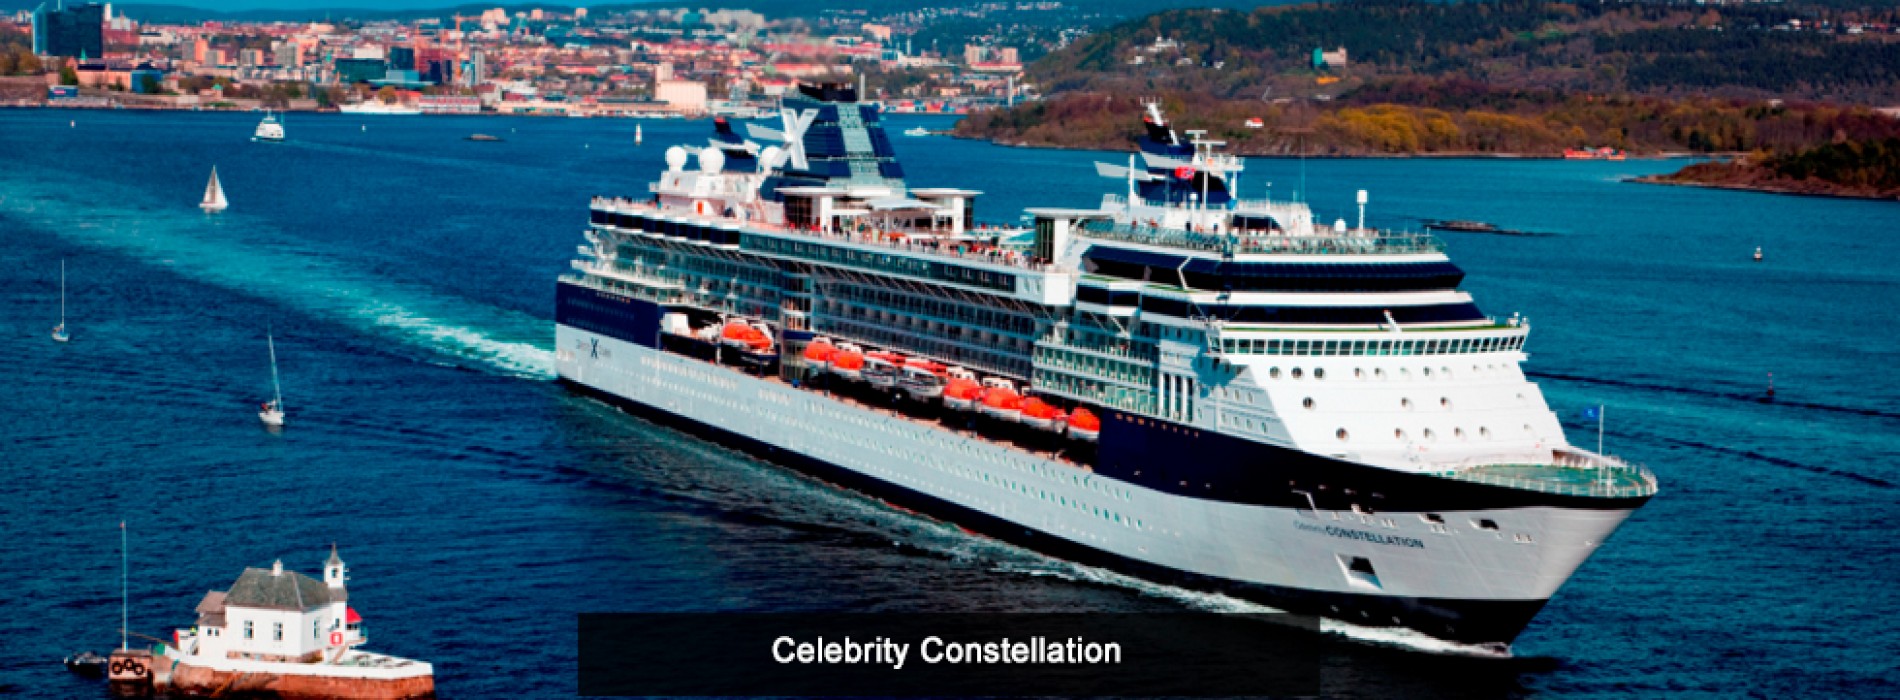 Celebrity Constellation arrives in style in Mumbai; guests enjoy an unforgettable evening